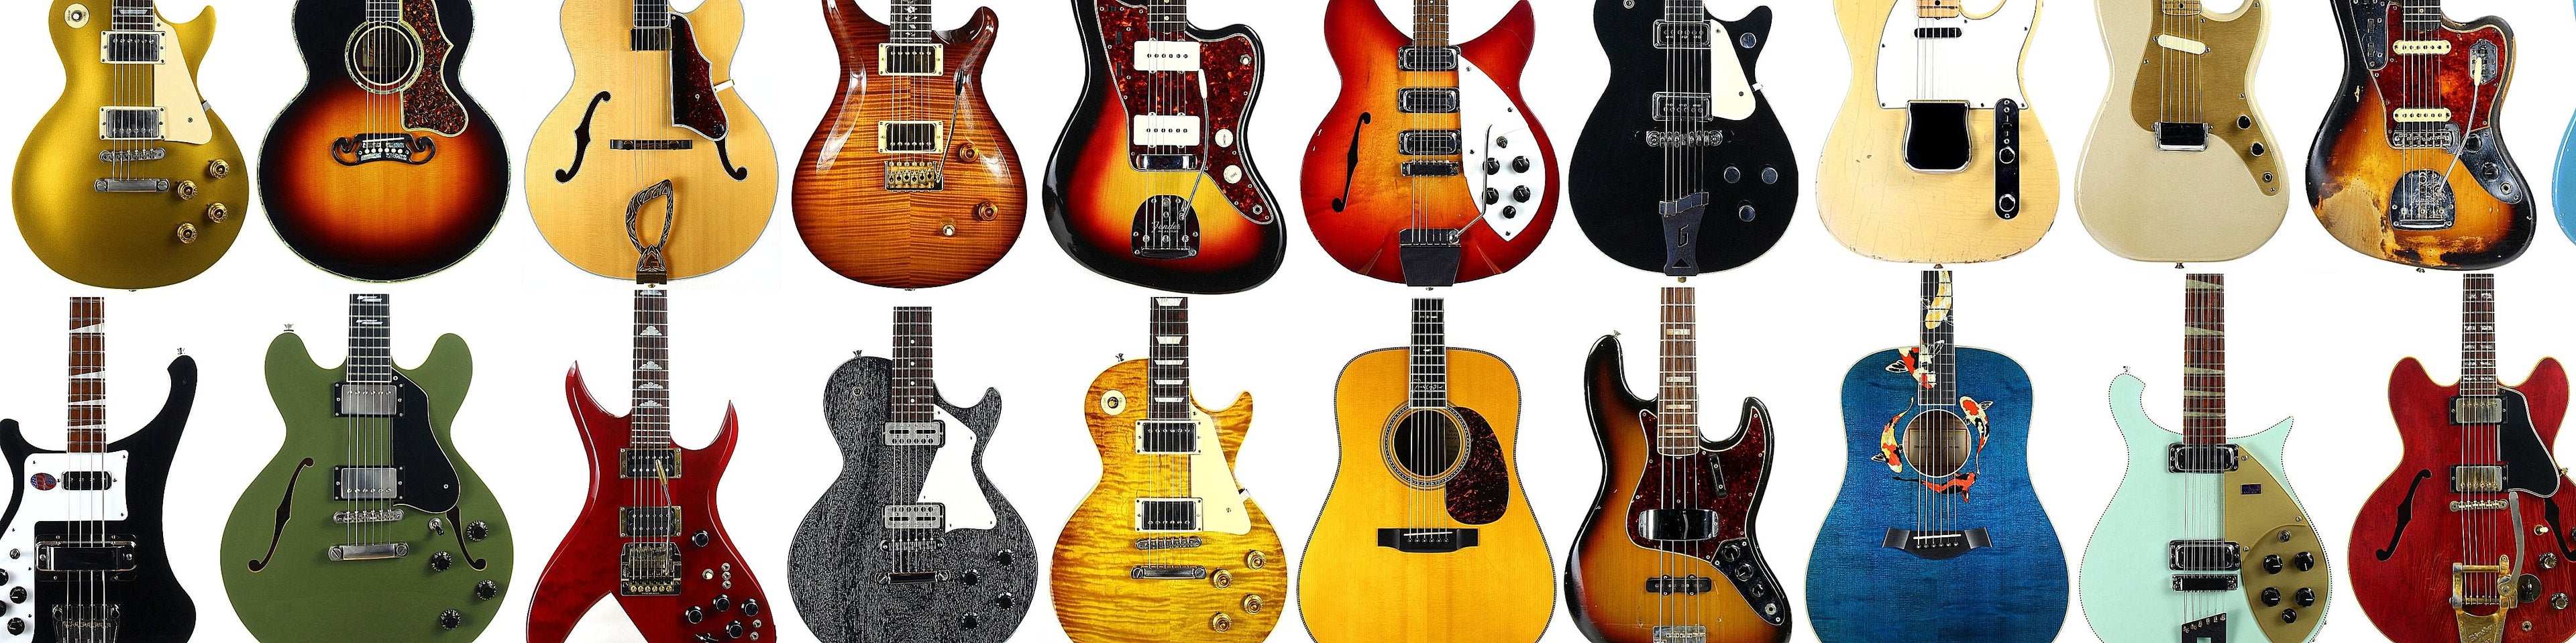 Large banner of quality used and vintage guitars